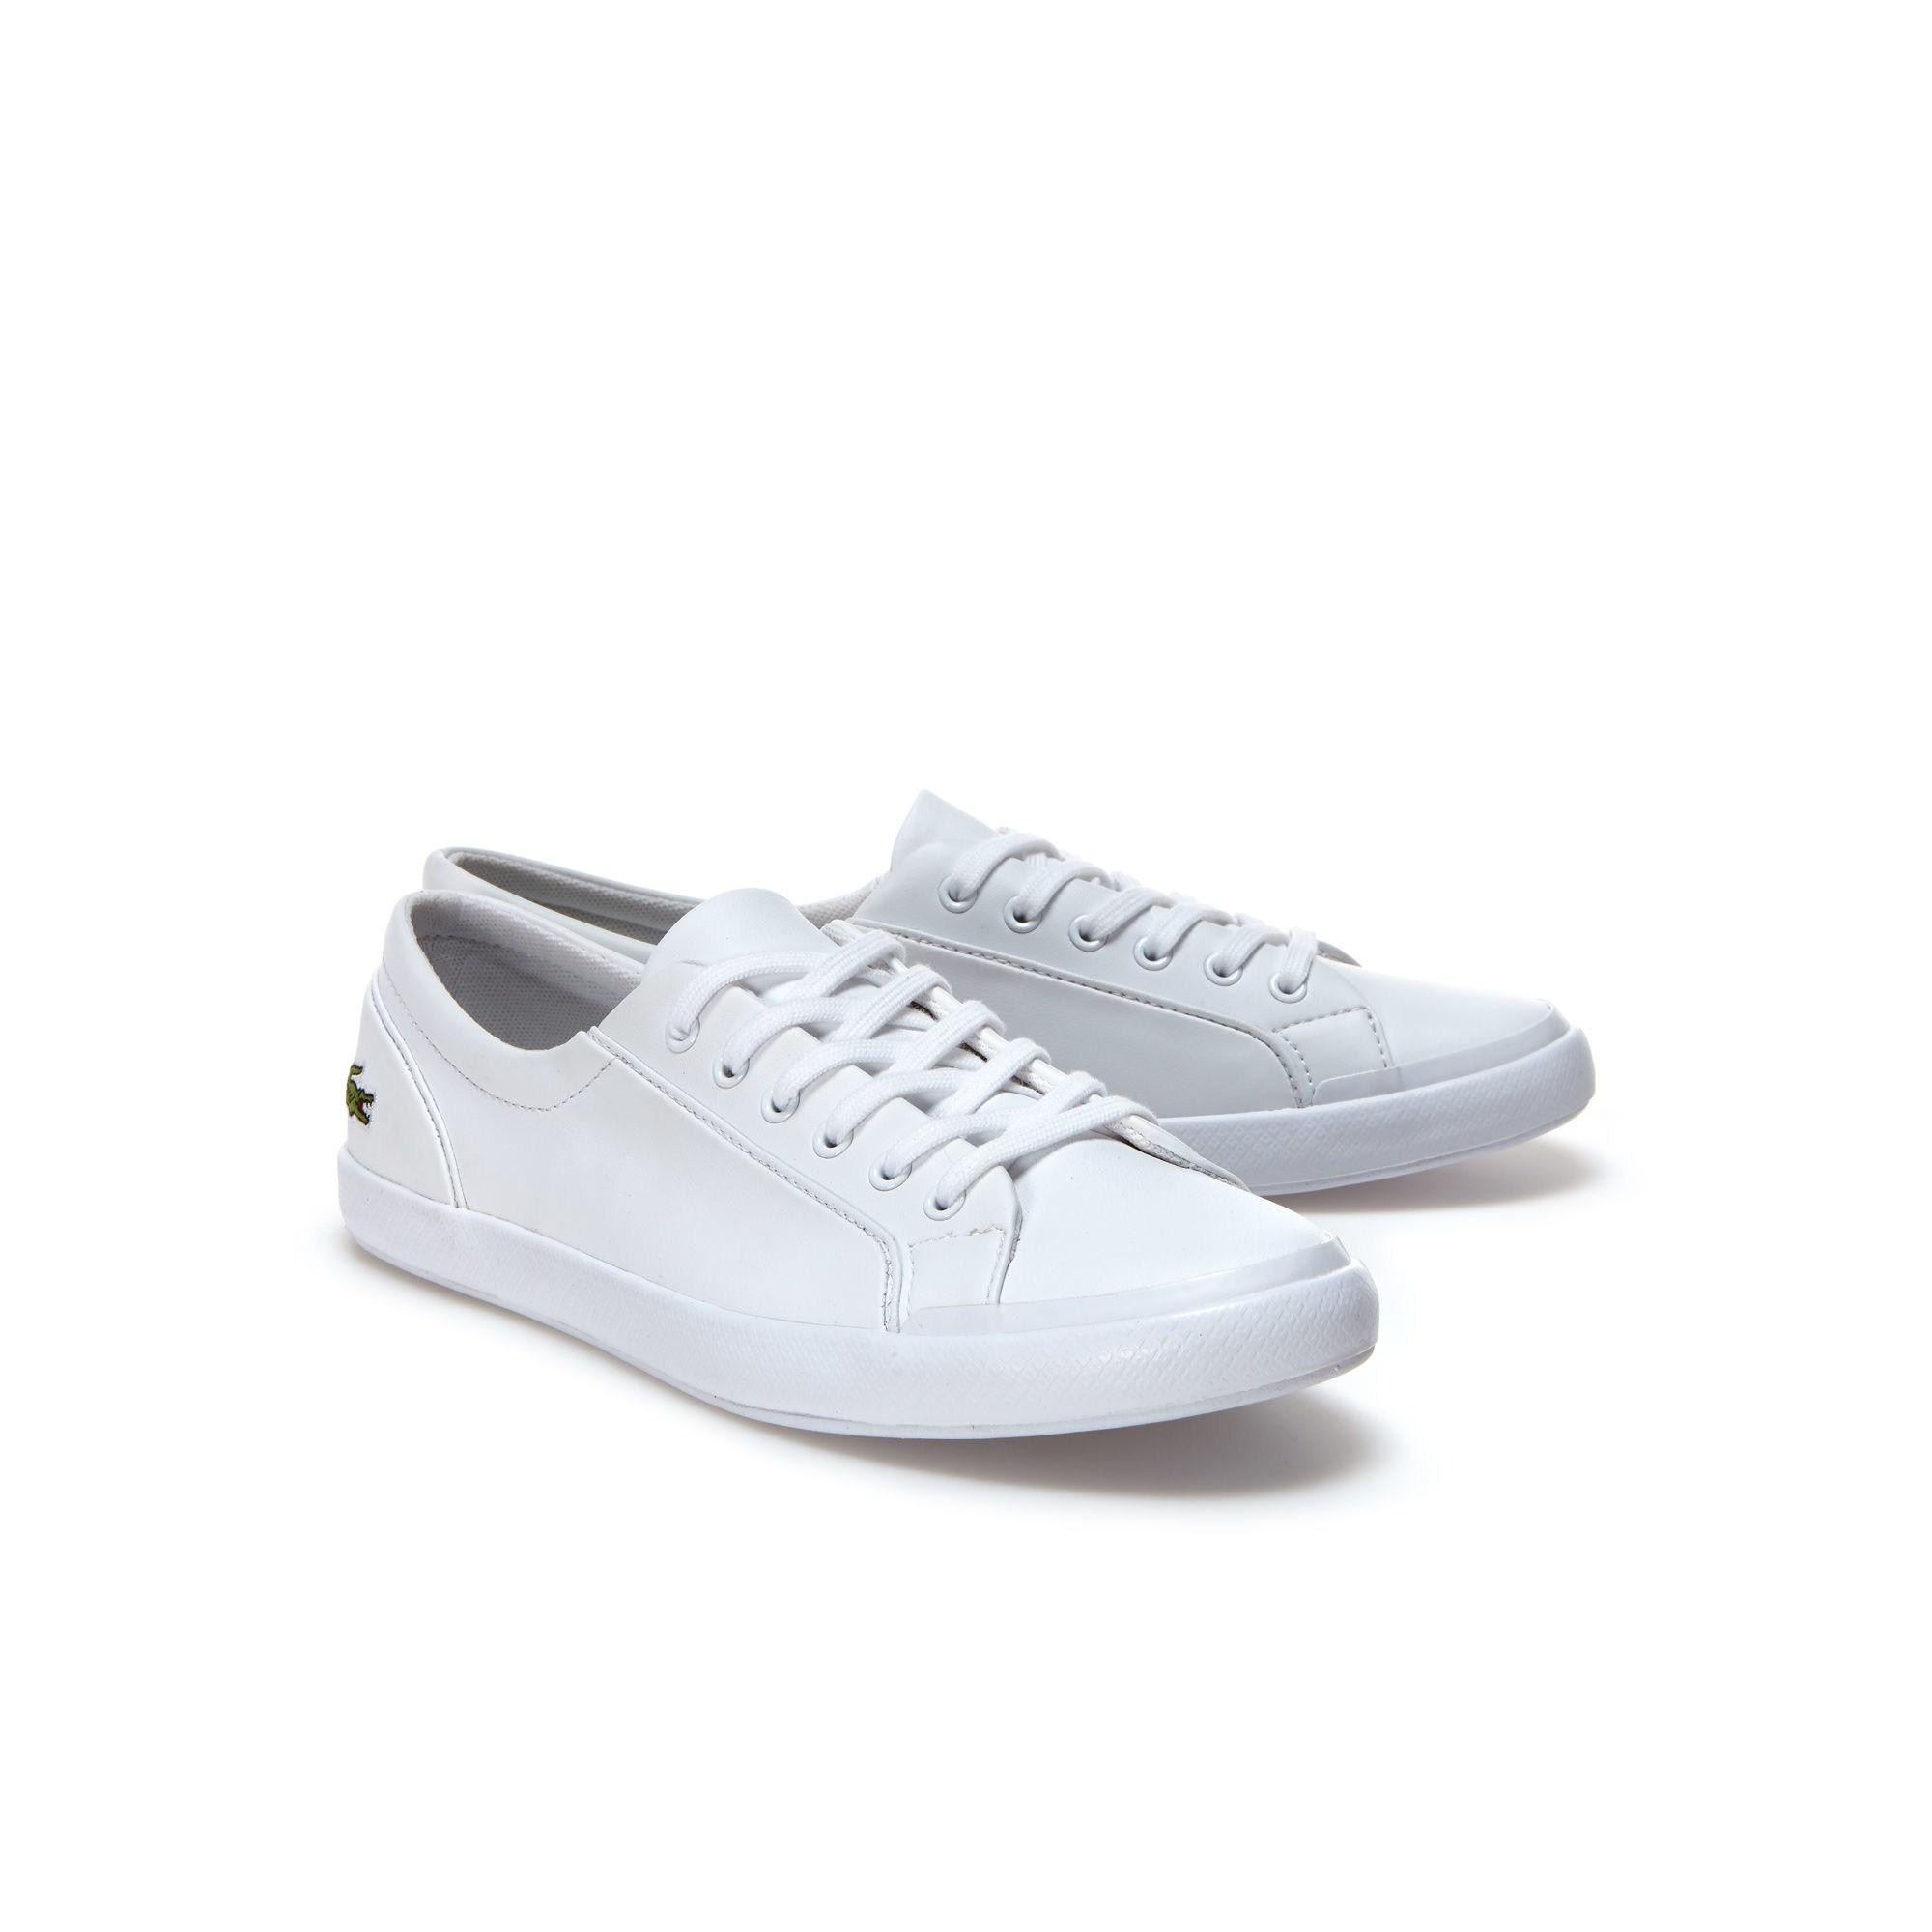 Lacoste Lancelle Bl Leather Sneakers in White - Lyst